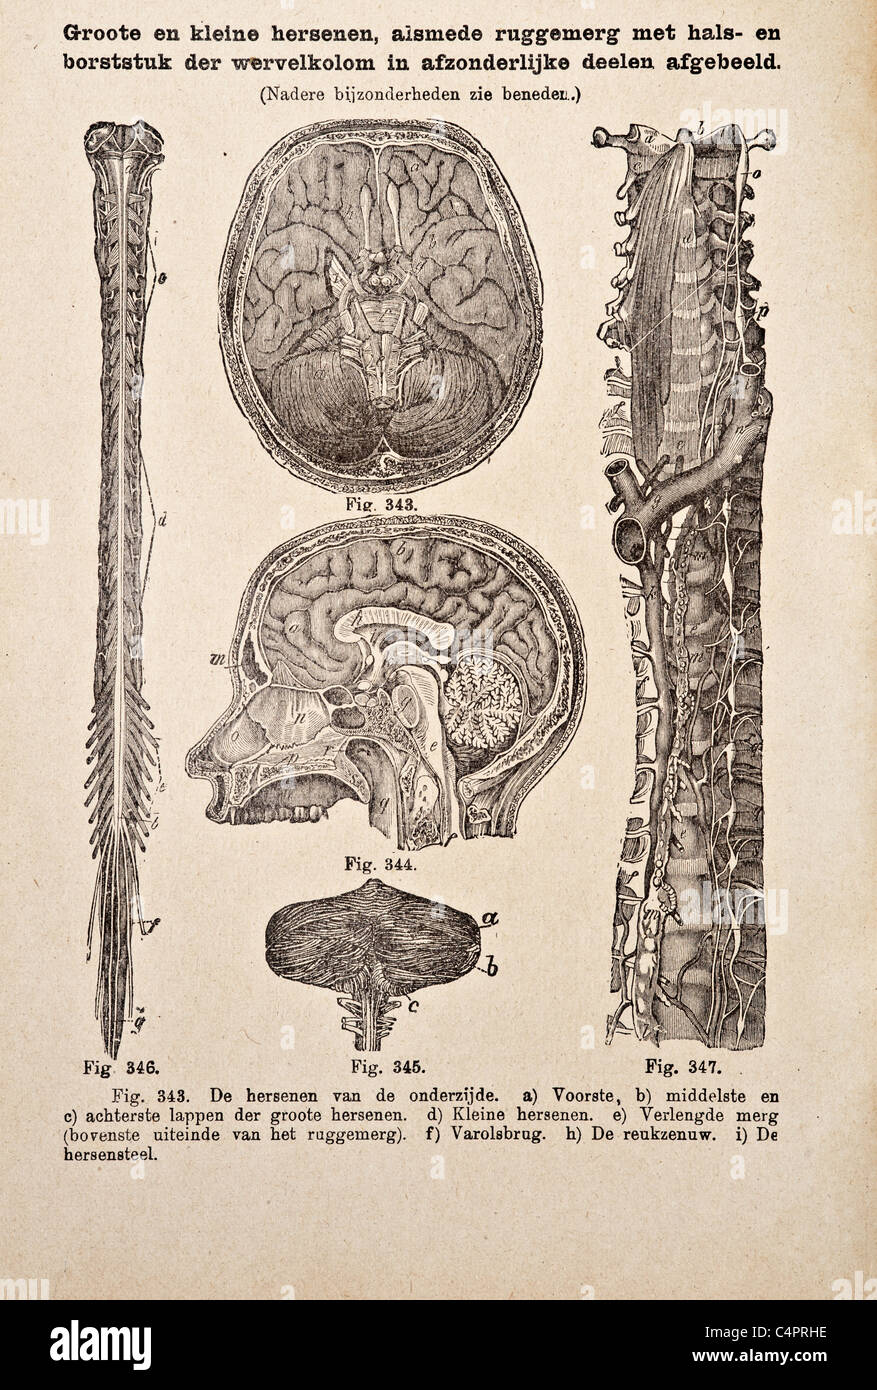 Antique medical illustration of a human brain. Stock Photo